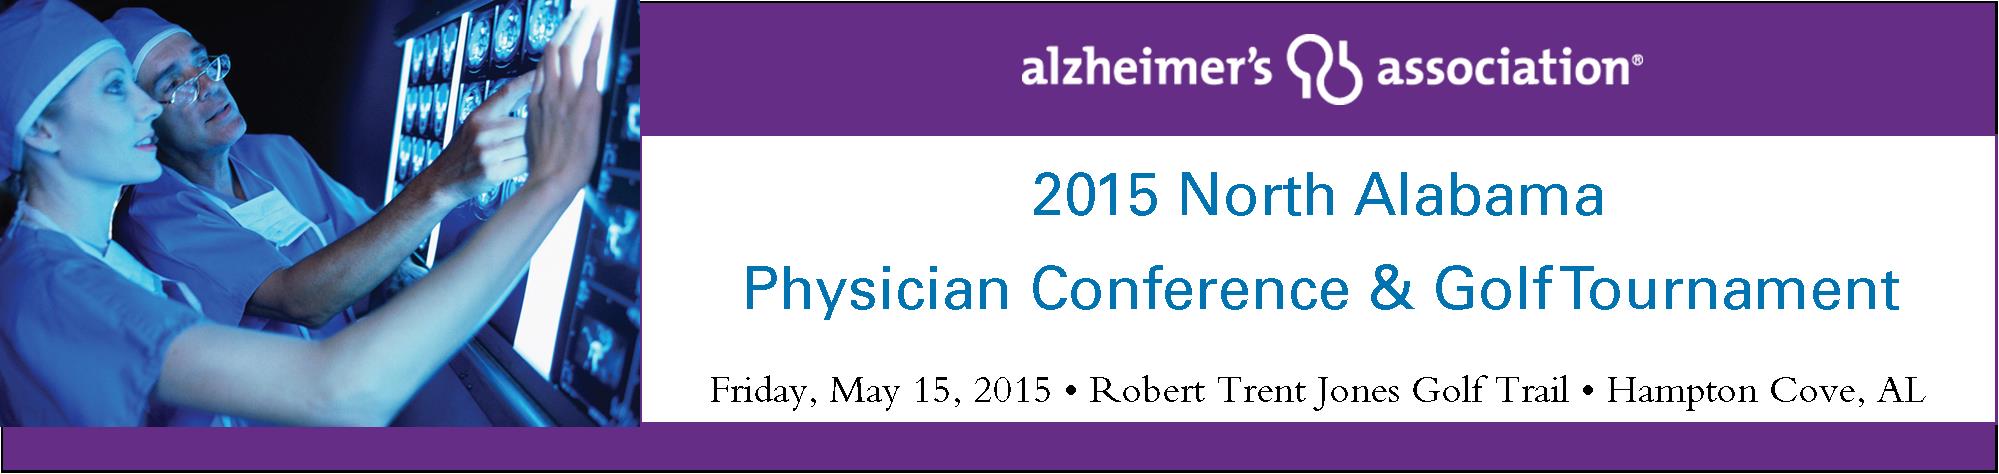 Physician Conference 2015